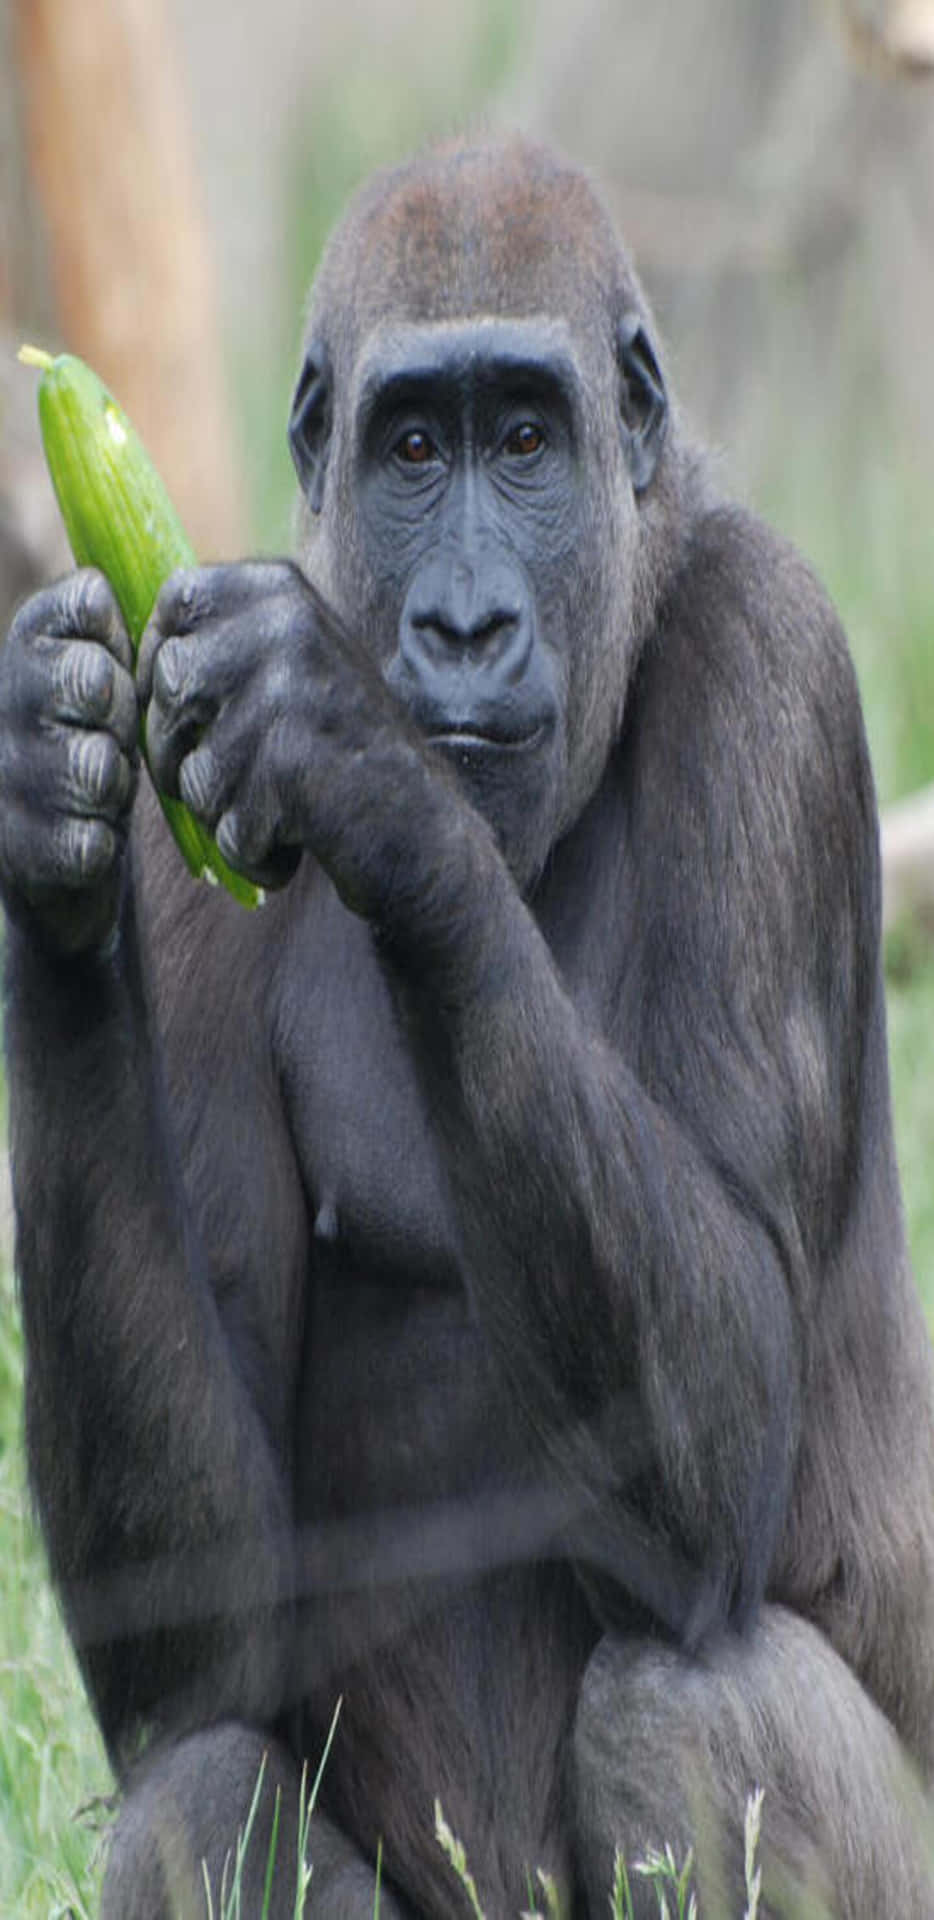 A Gorilla Is Eating A Cucumber